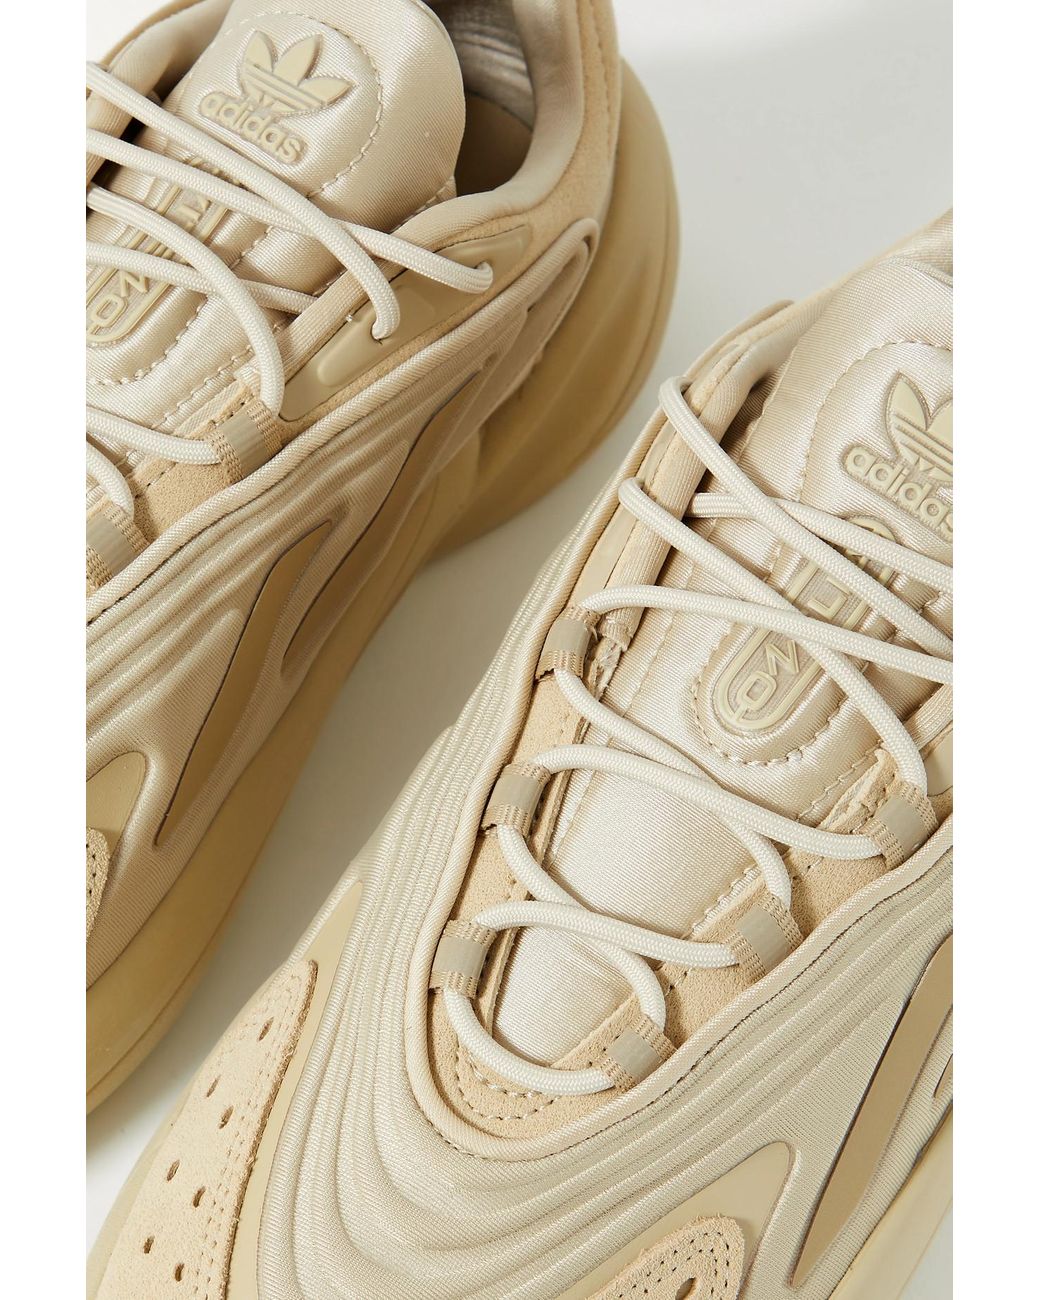 Adidas Originals Ozelia Rubber And Suede-Trimmed Neoprene Sneakers In  Natural | Lyst